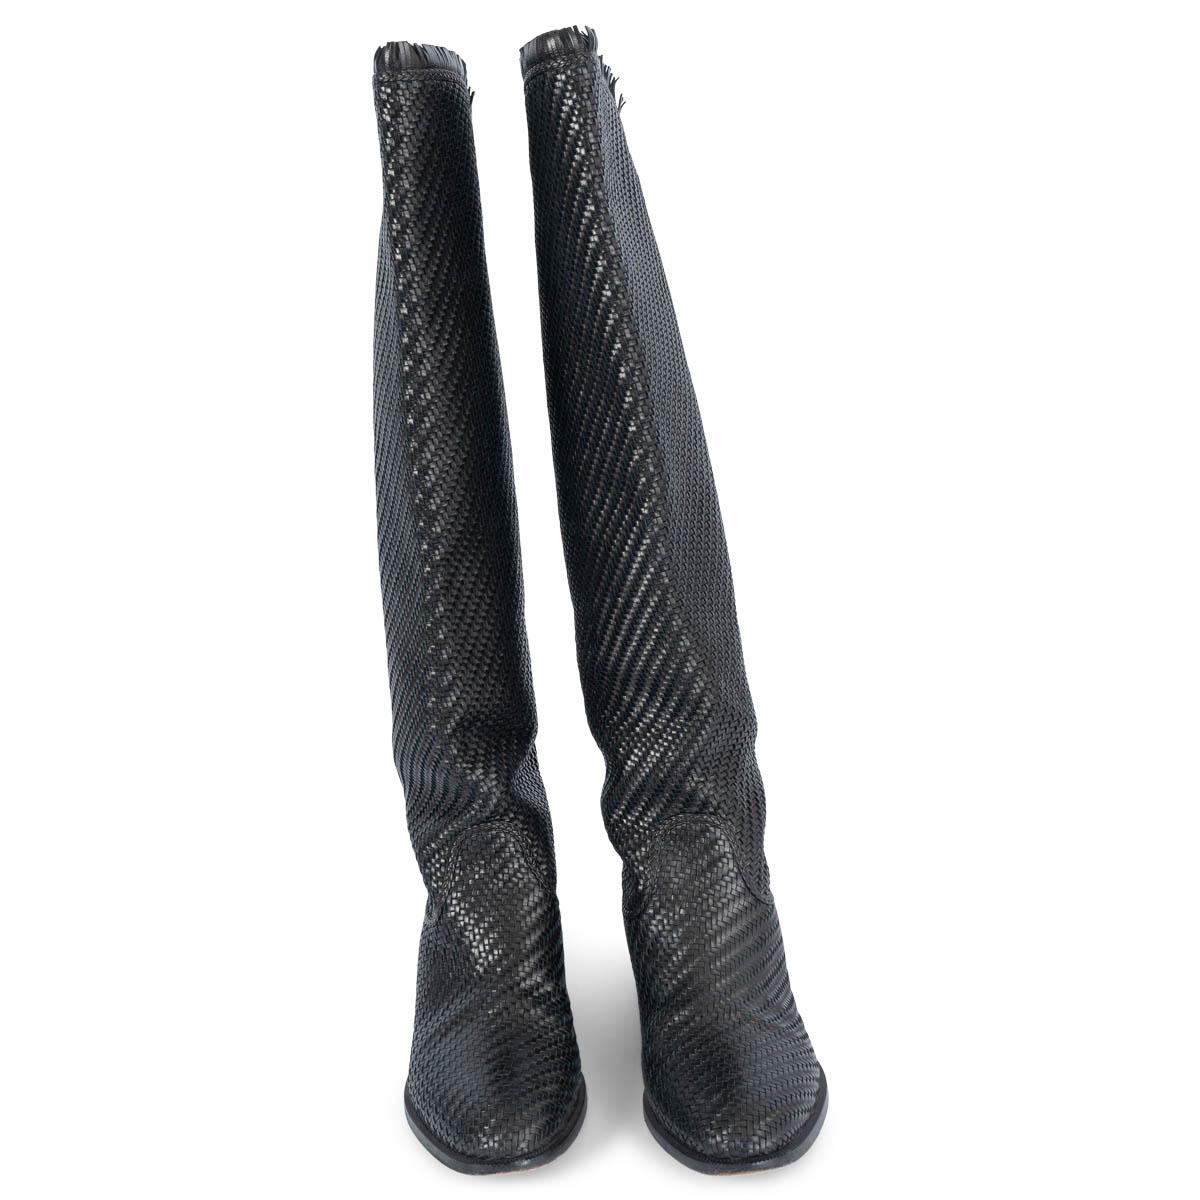 100% authentic Christian Dior 2020 Global woven riding boots in black lambskin leather with fringe trim. Have been worn and are in excellent condition. 

2020 Resort

Measurements
Imprinted Size	38.5
Shoe Size	38.5
Inside Sole	25.5cm